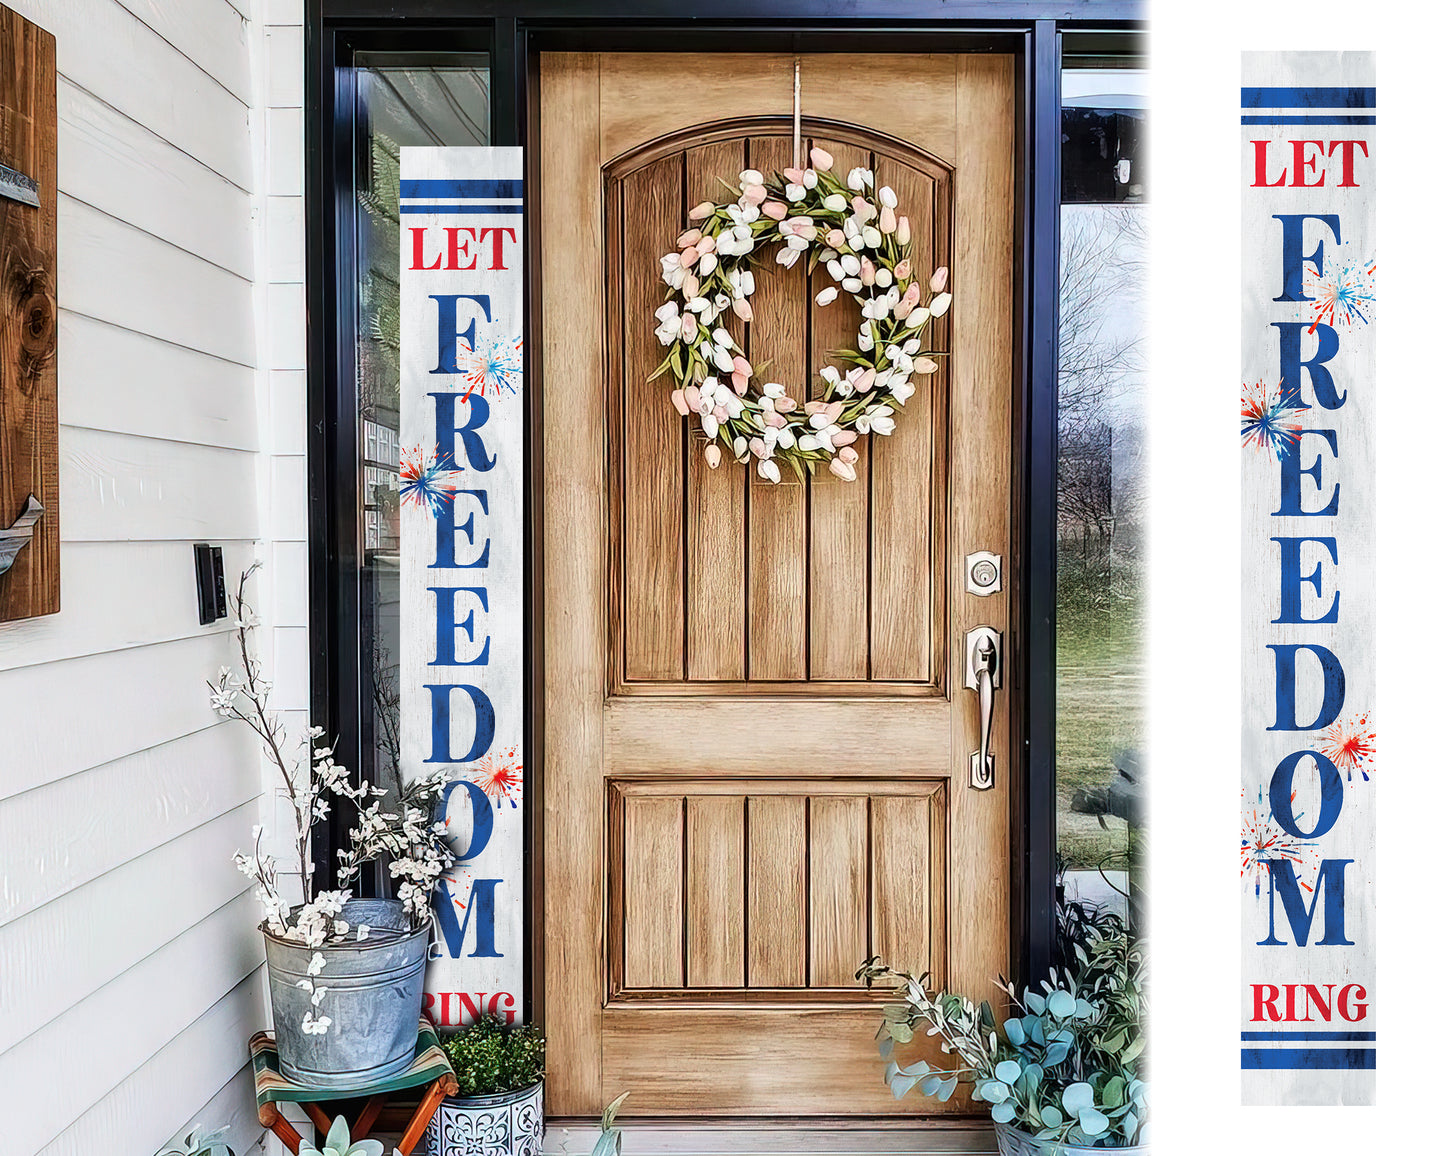 72in Let Freedom Ring Porch Sign | Patriotic Wooden Porch Decor | 4th of July Decor for Front Door | Independence Day Outdoor Decor